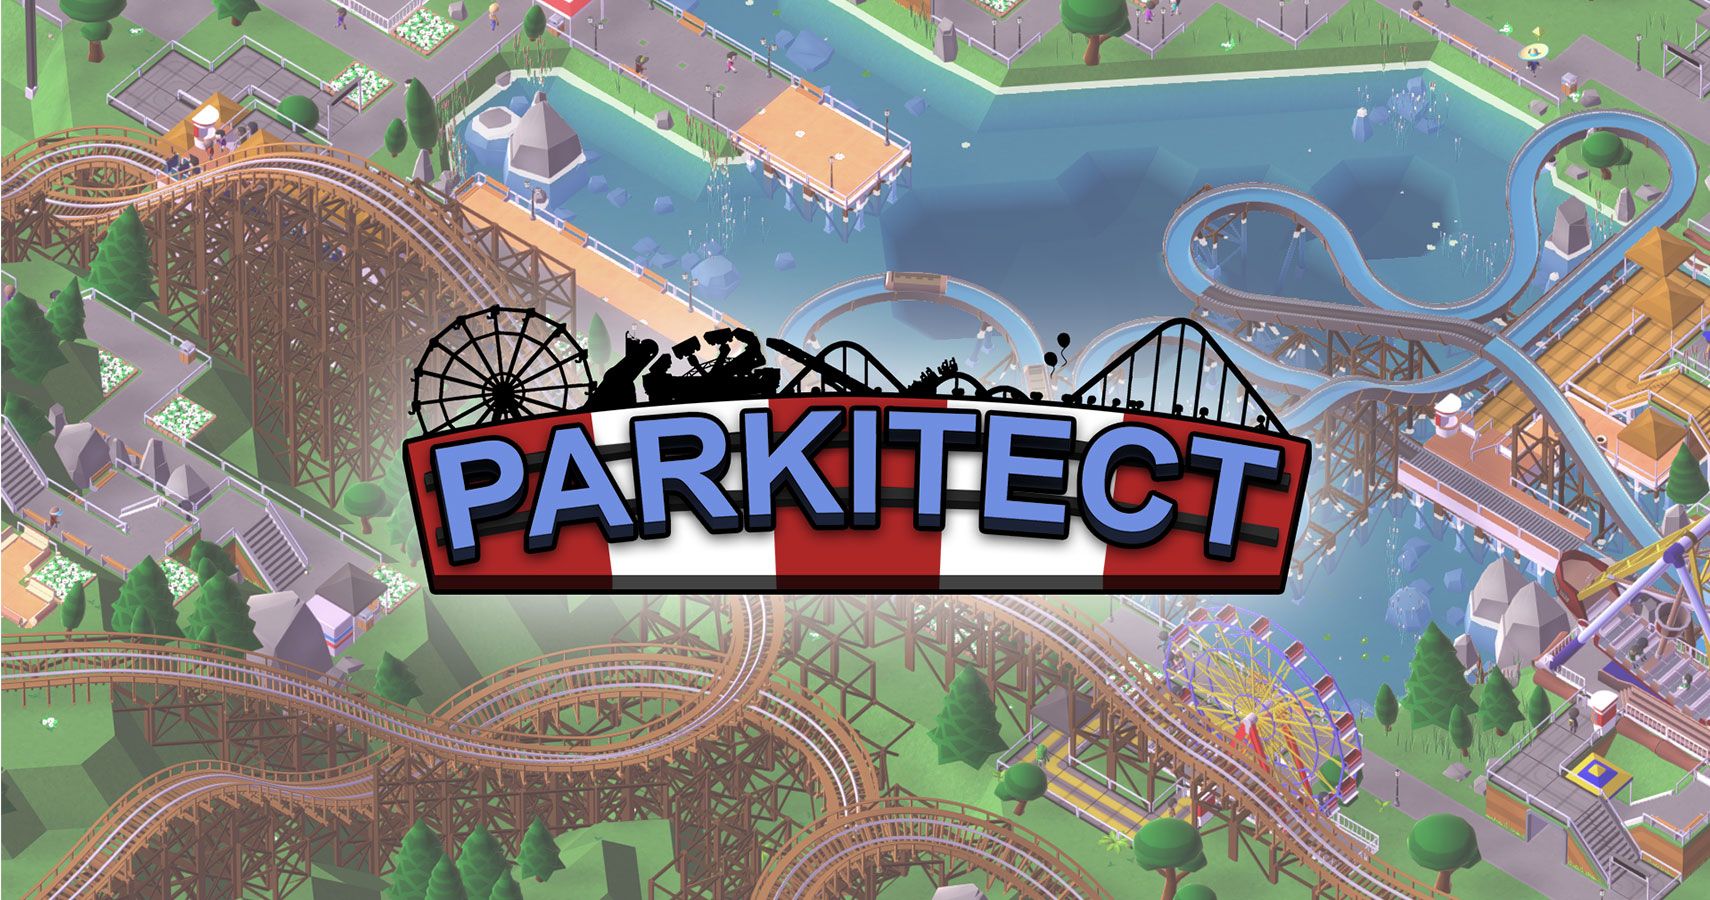 RollerCoaster Tycoon Review 2020 - Amusement Park Video Game